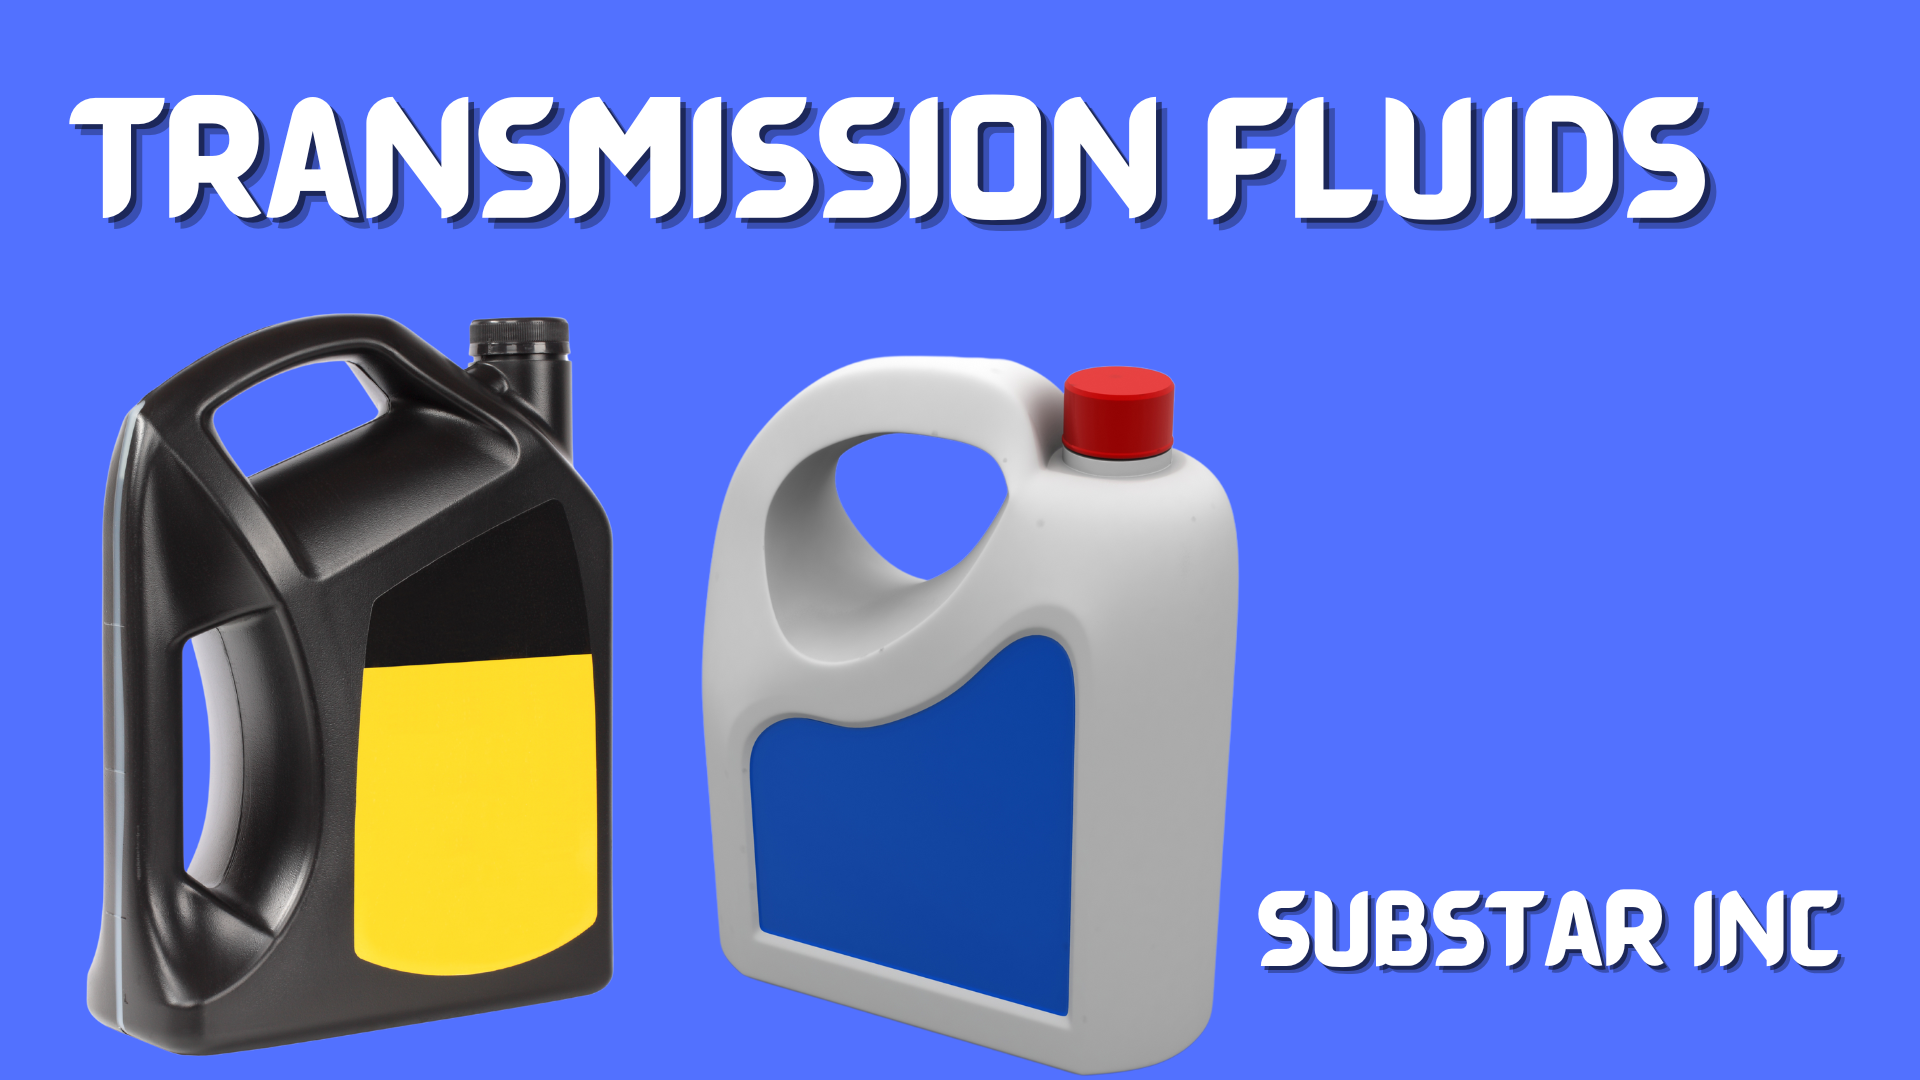 2 Important Types of Transmission fluids for Trucks You Should Know